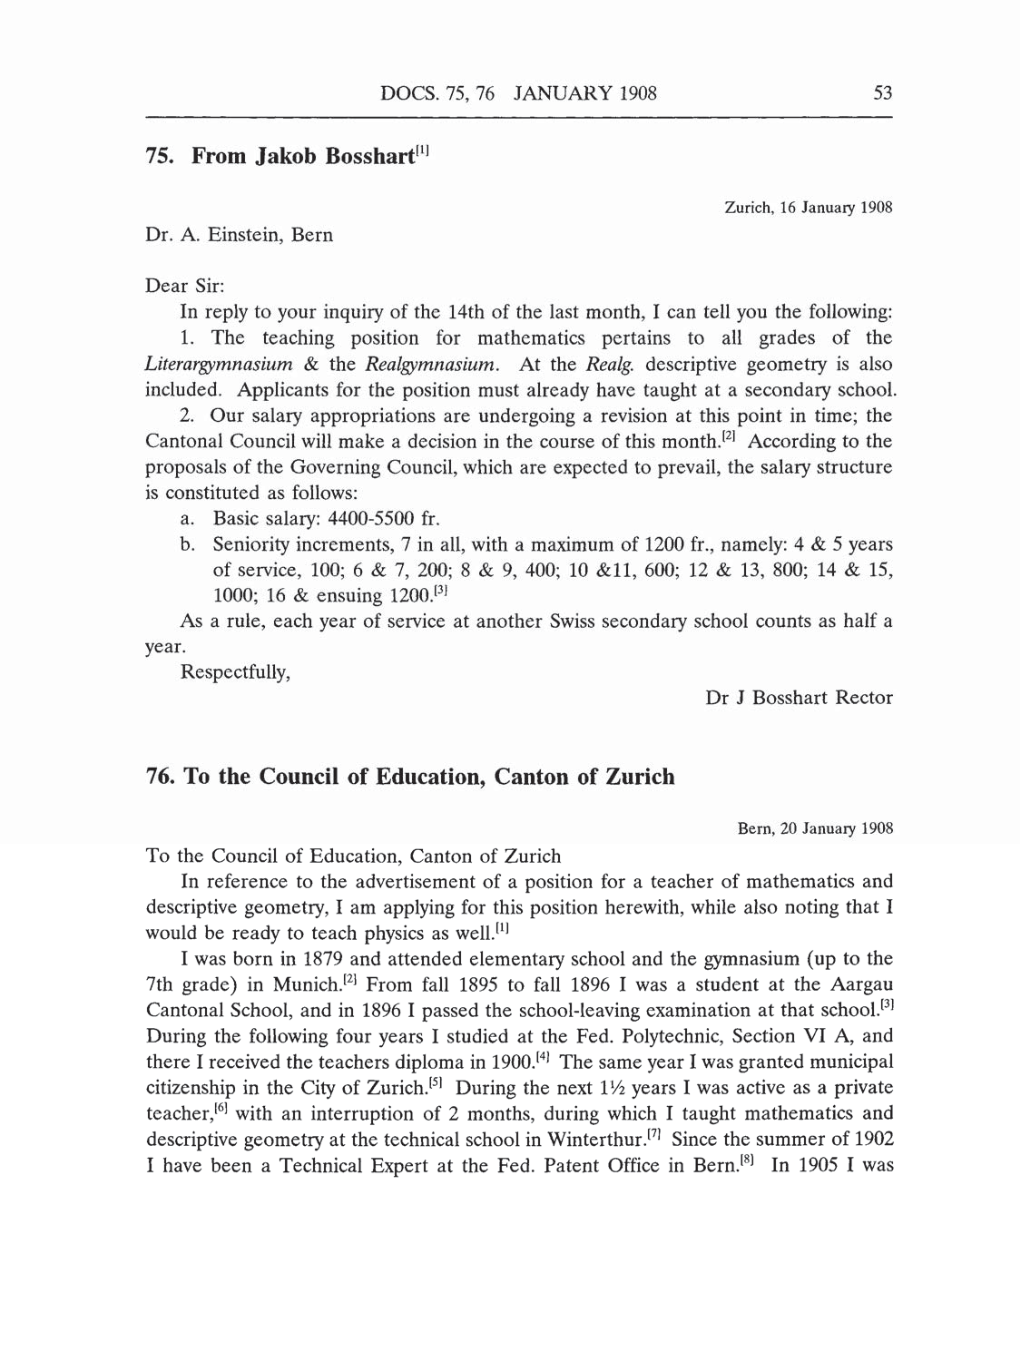 Volume 5: The Swiss Years: Correspondence, 1902-1914 (English translation supplement) page 53